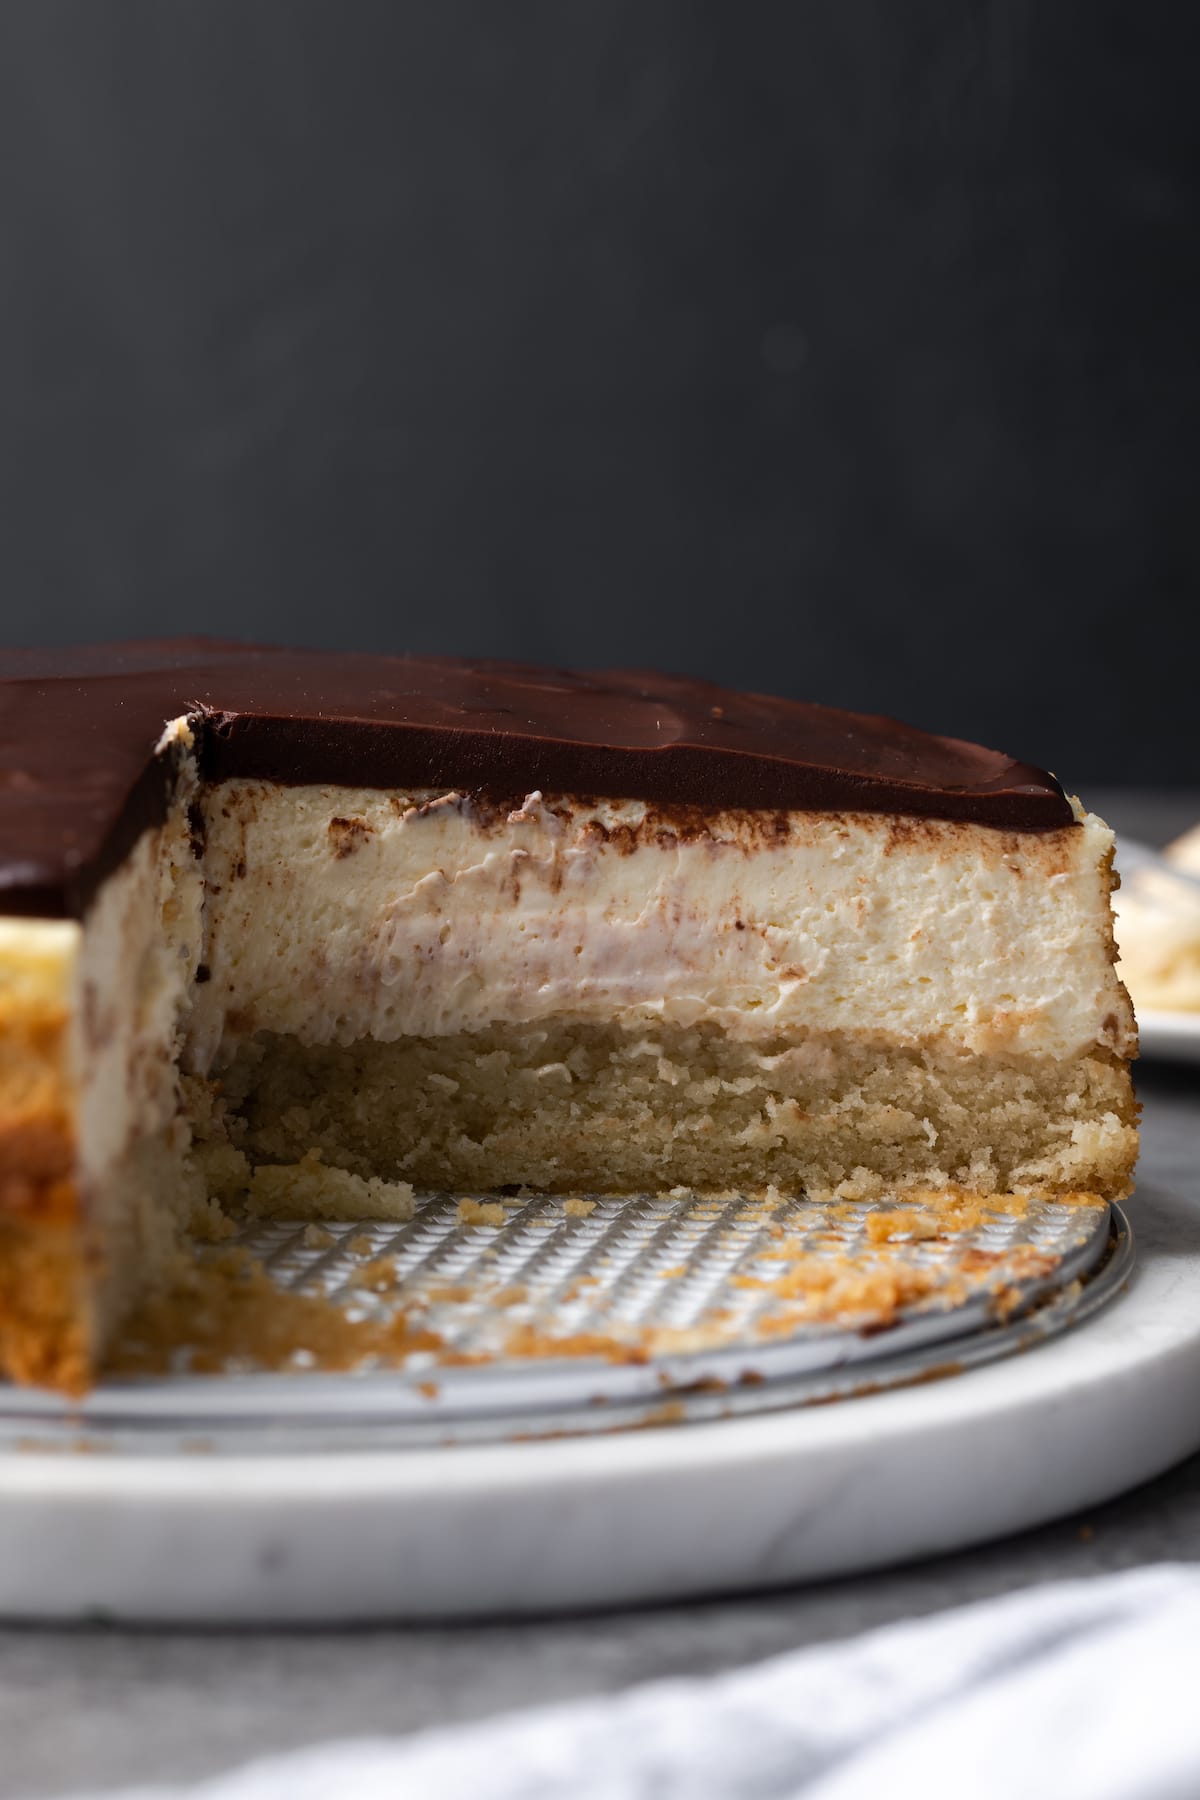 Boston Cream Pie cheesecake with slices missing to reveal the cake layers.